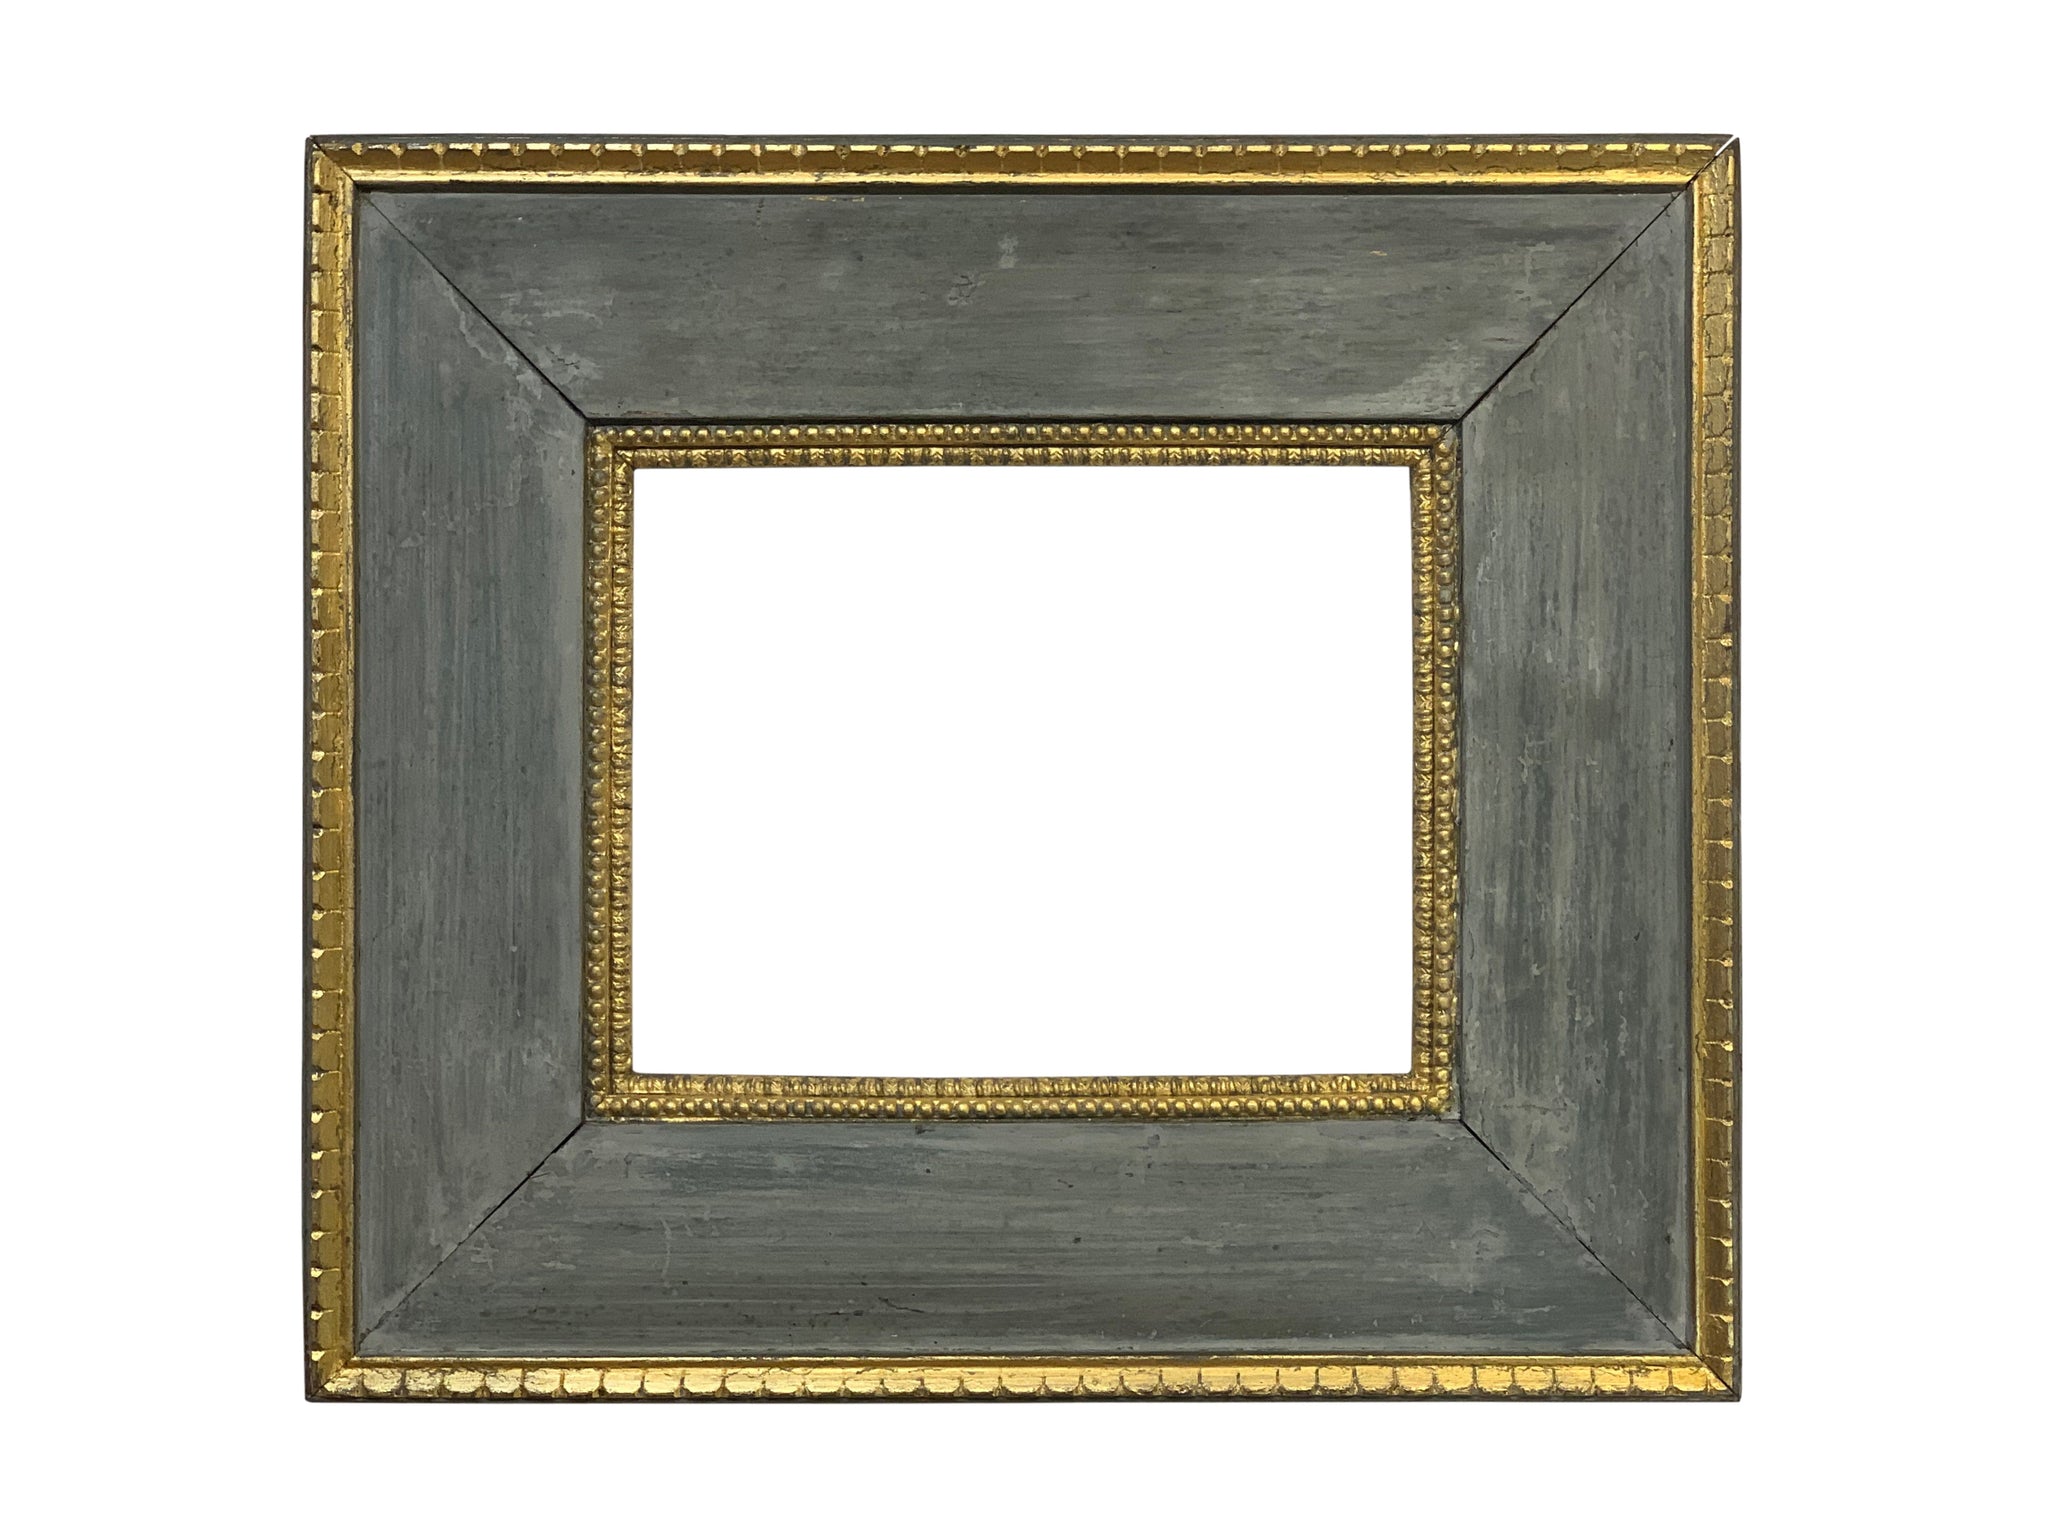 10x12 inch Vintage Silver and Gold Picture Frame for canvas art circa 1900s (20th Century American).